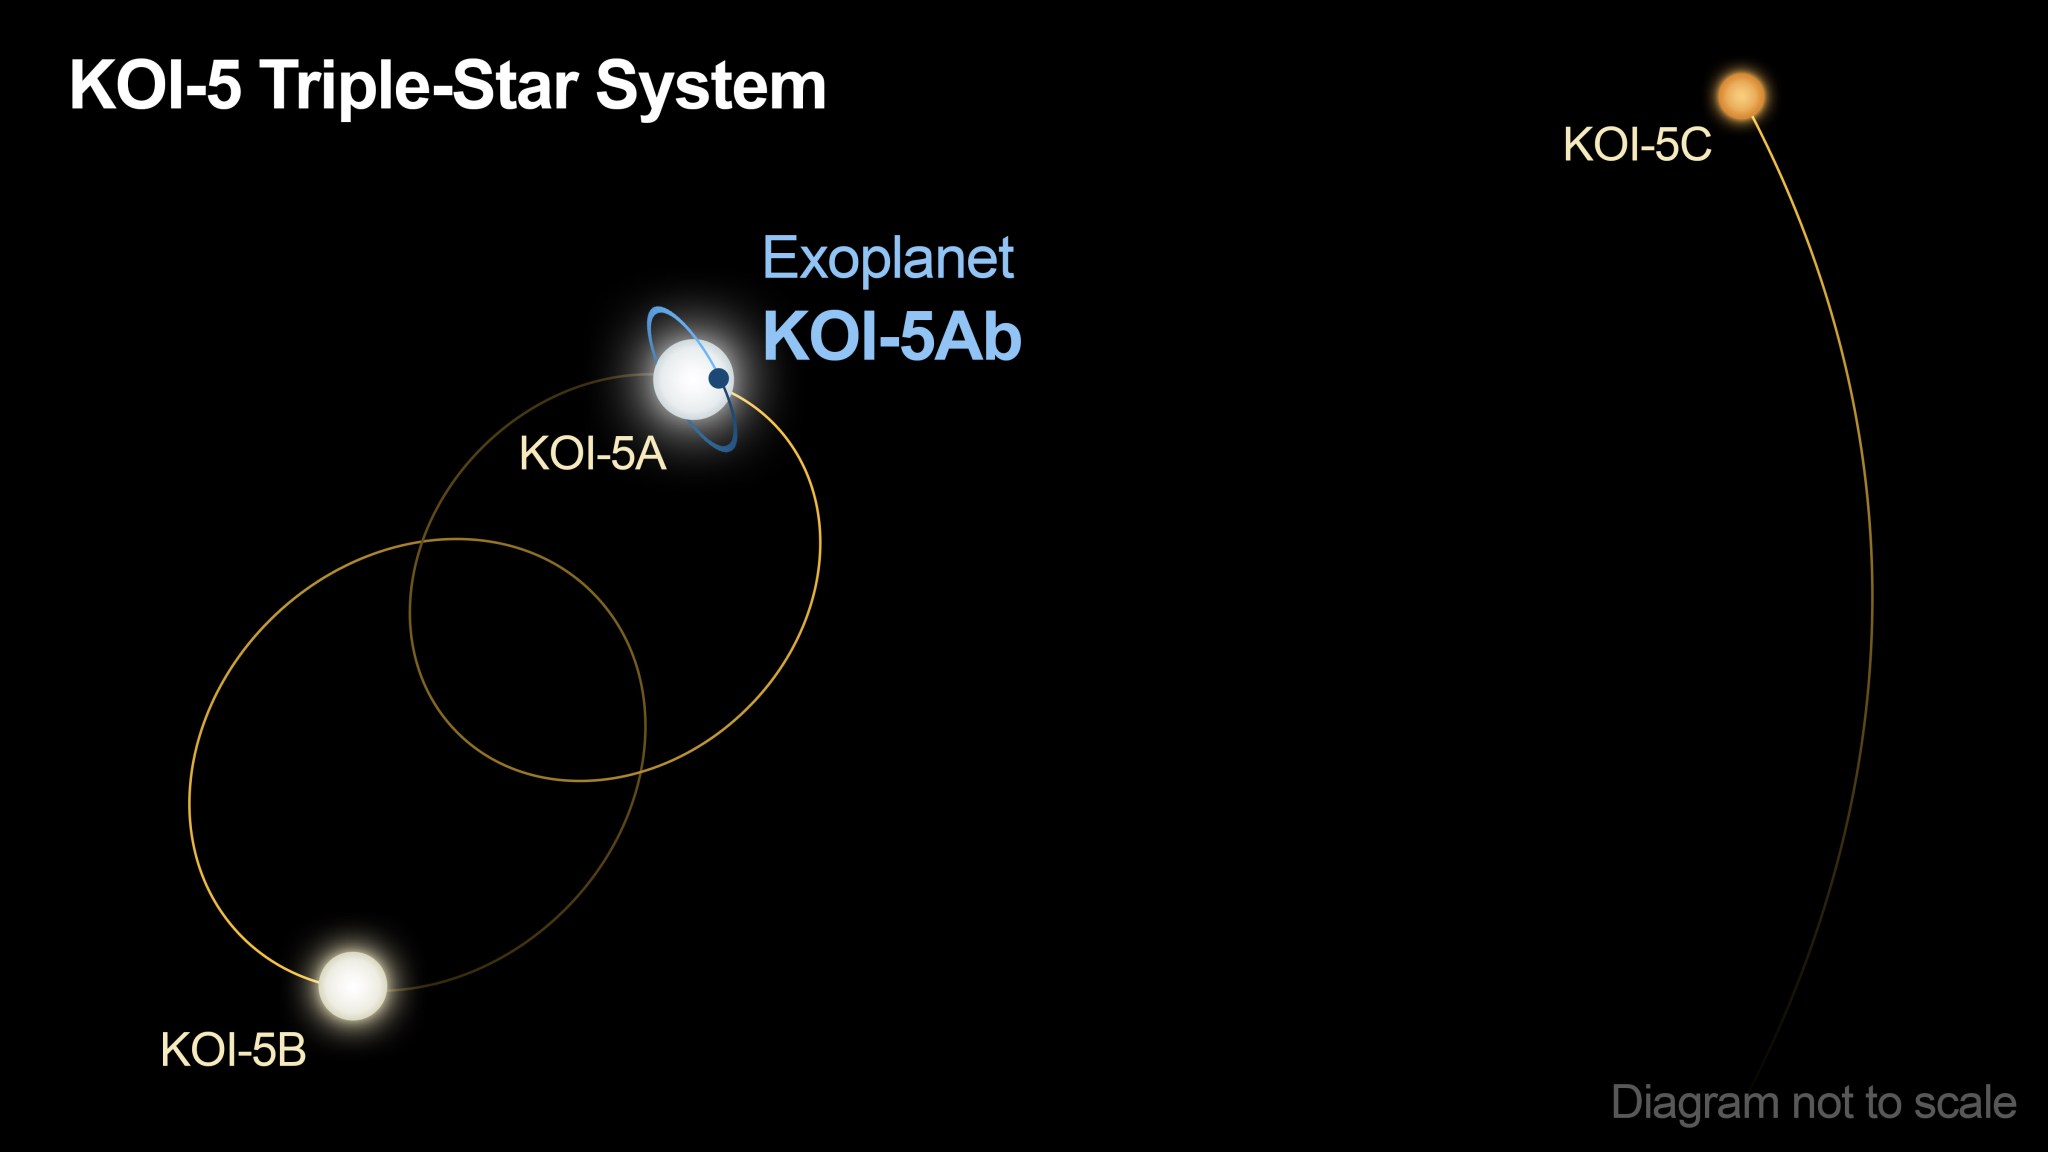 The KOI-5 star system consists of three stars, labeled A, B, and C, in this diagram.